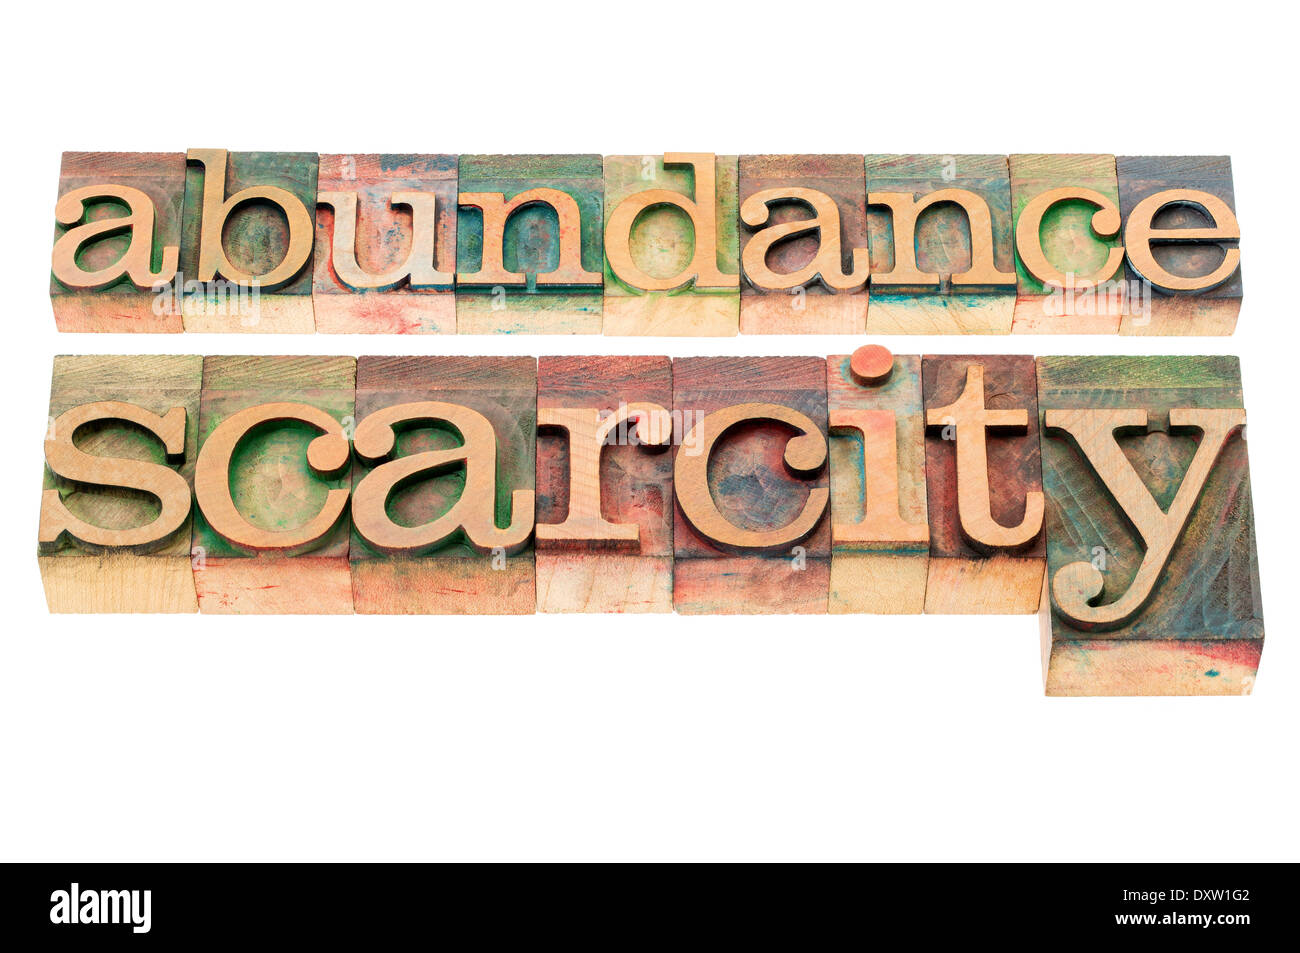 abundance and scarcity - isolated words in n letterpress wood type blocks stained by color inks Stock Photo